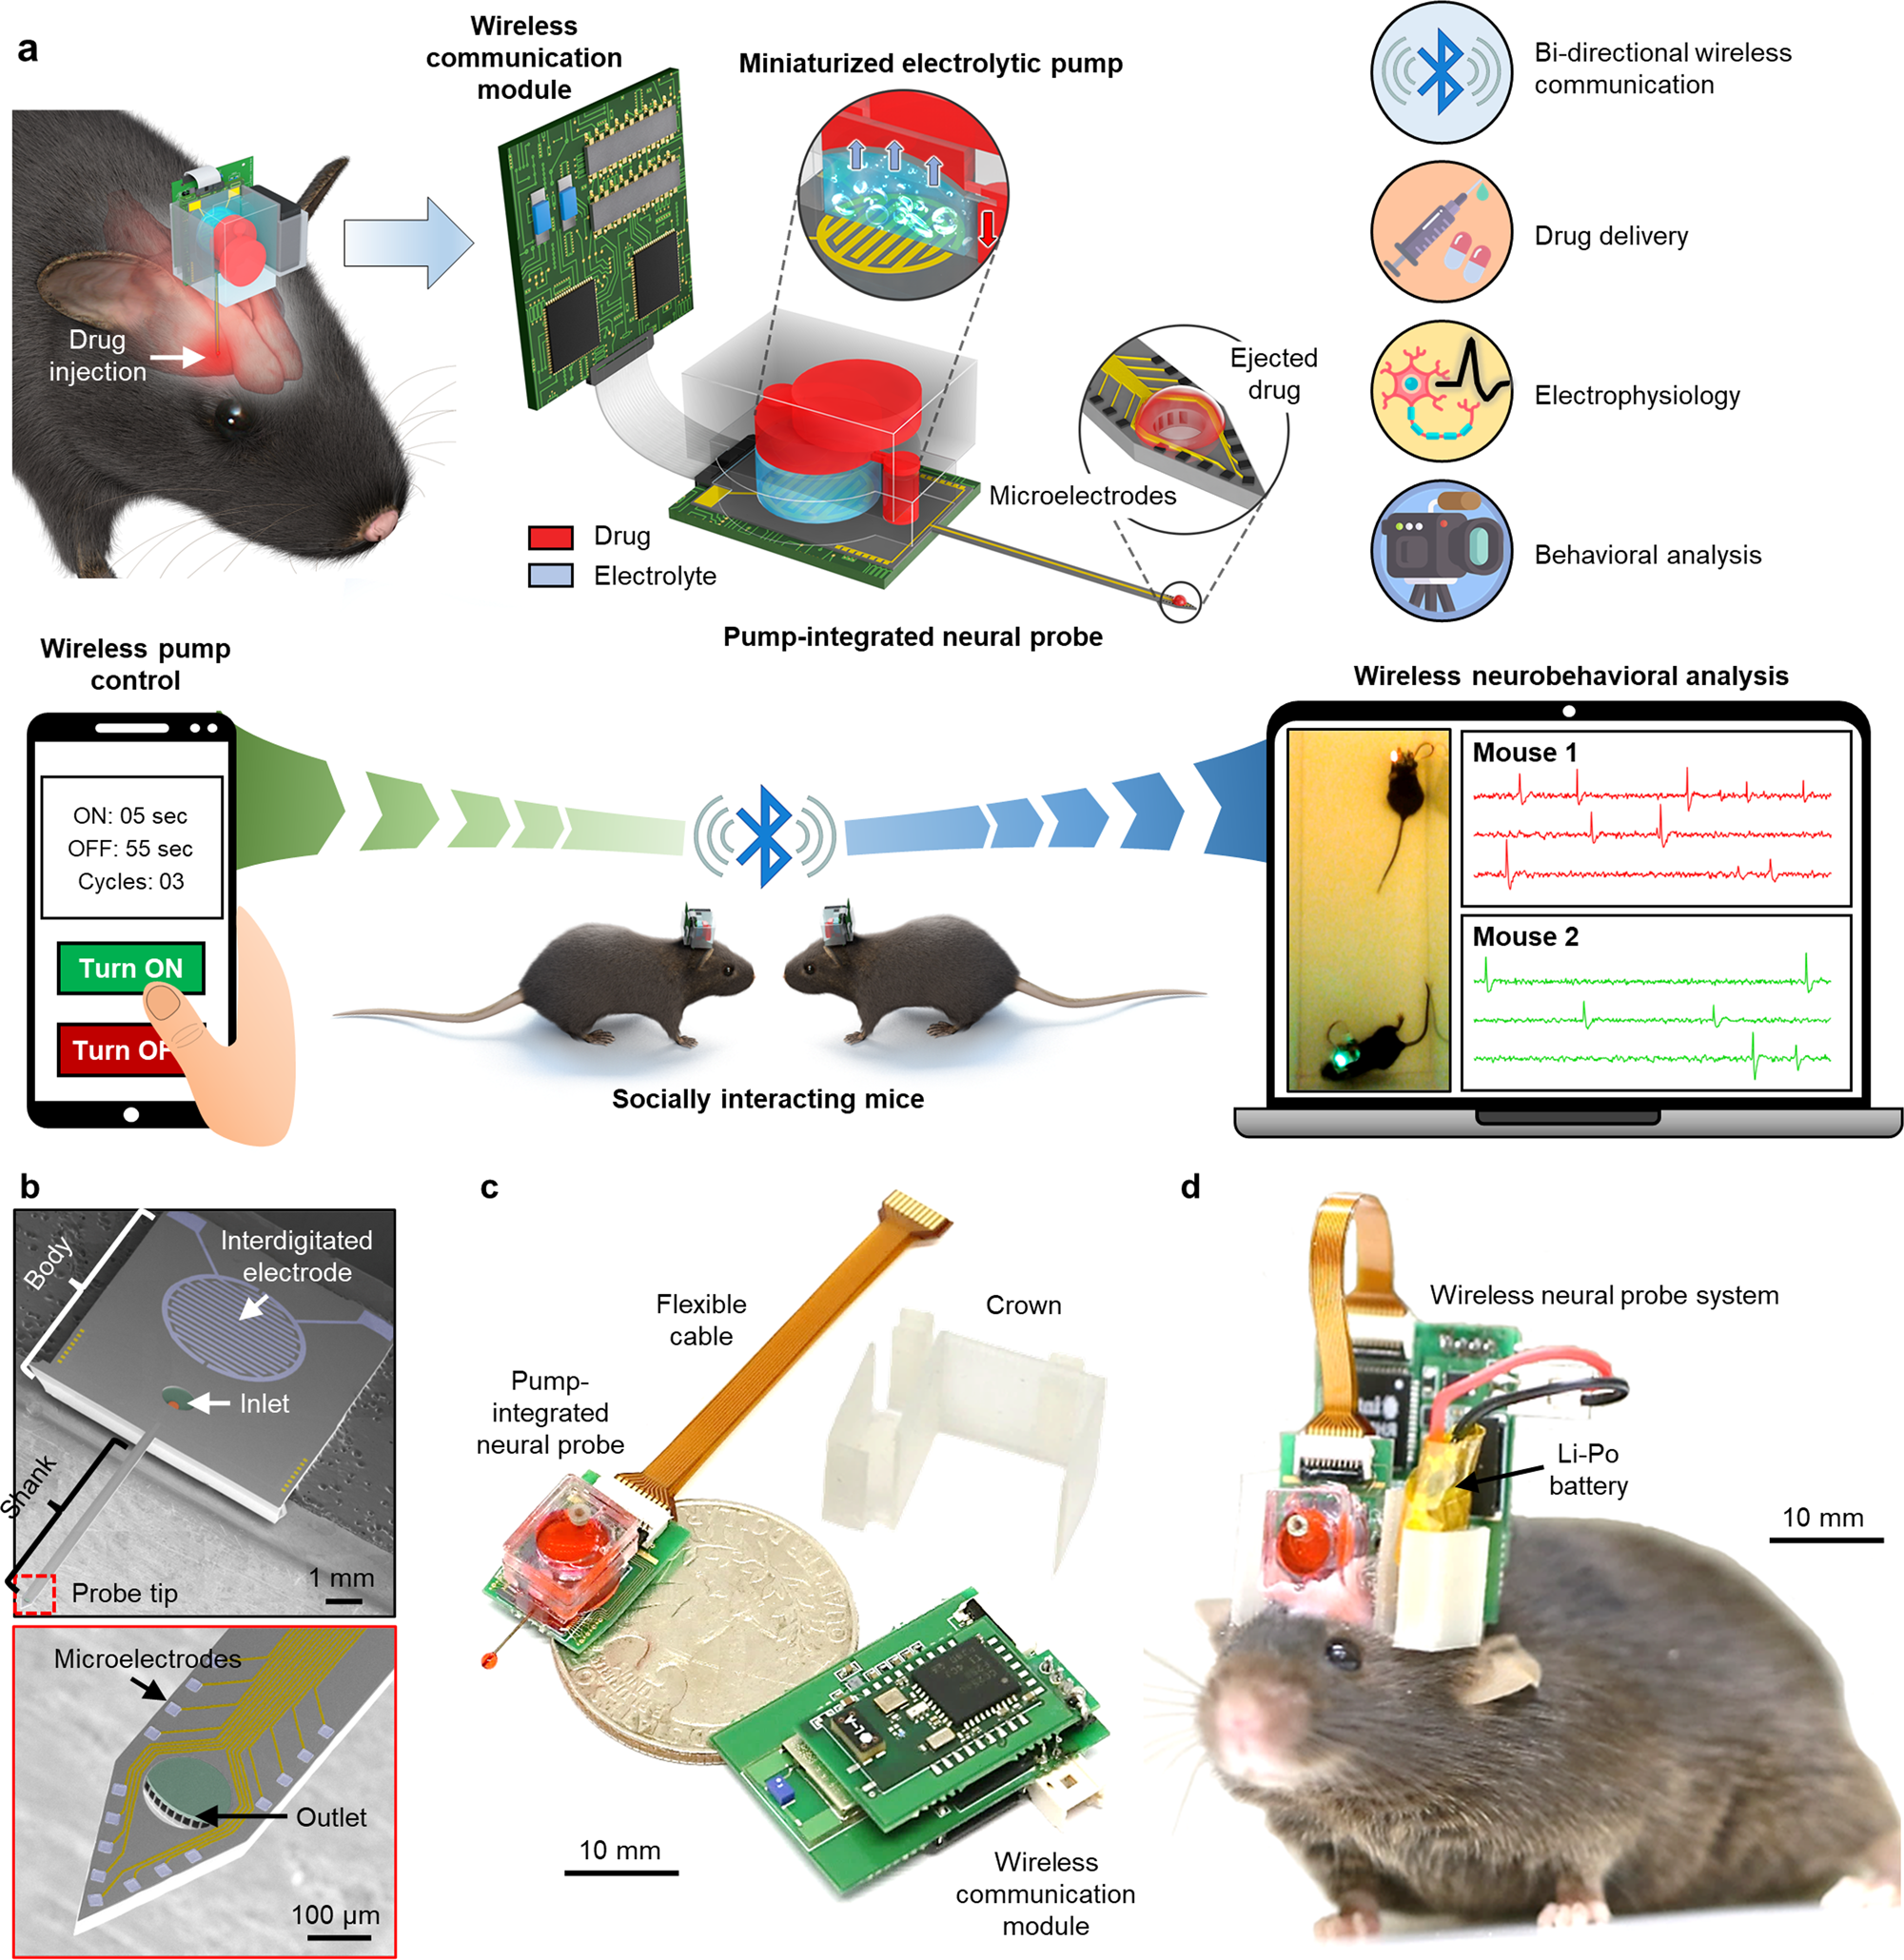 Neural probe system for behavioral neuropharmacology by bi-directional  wireless drug delivery and electrophysiology in socially interacting mice |  Nature Communications